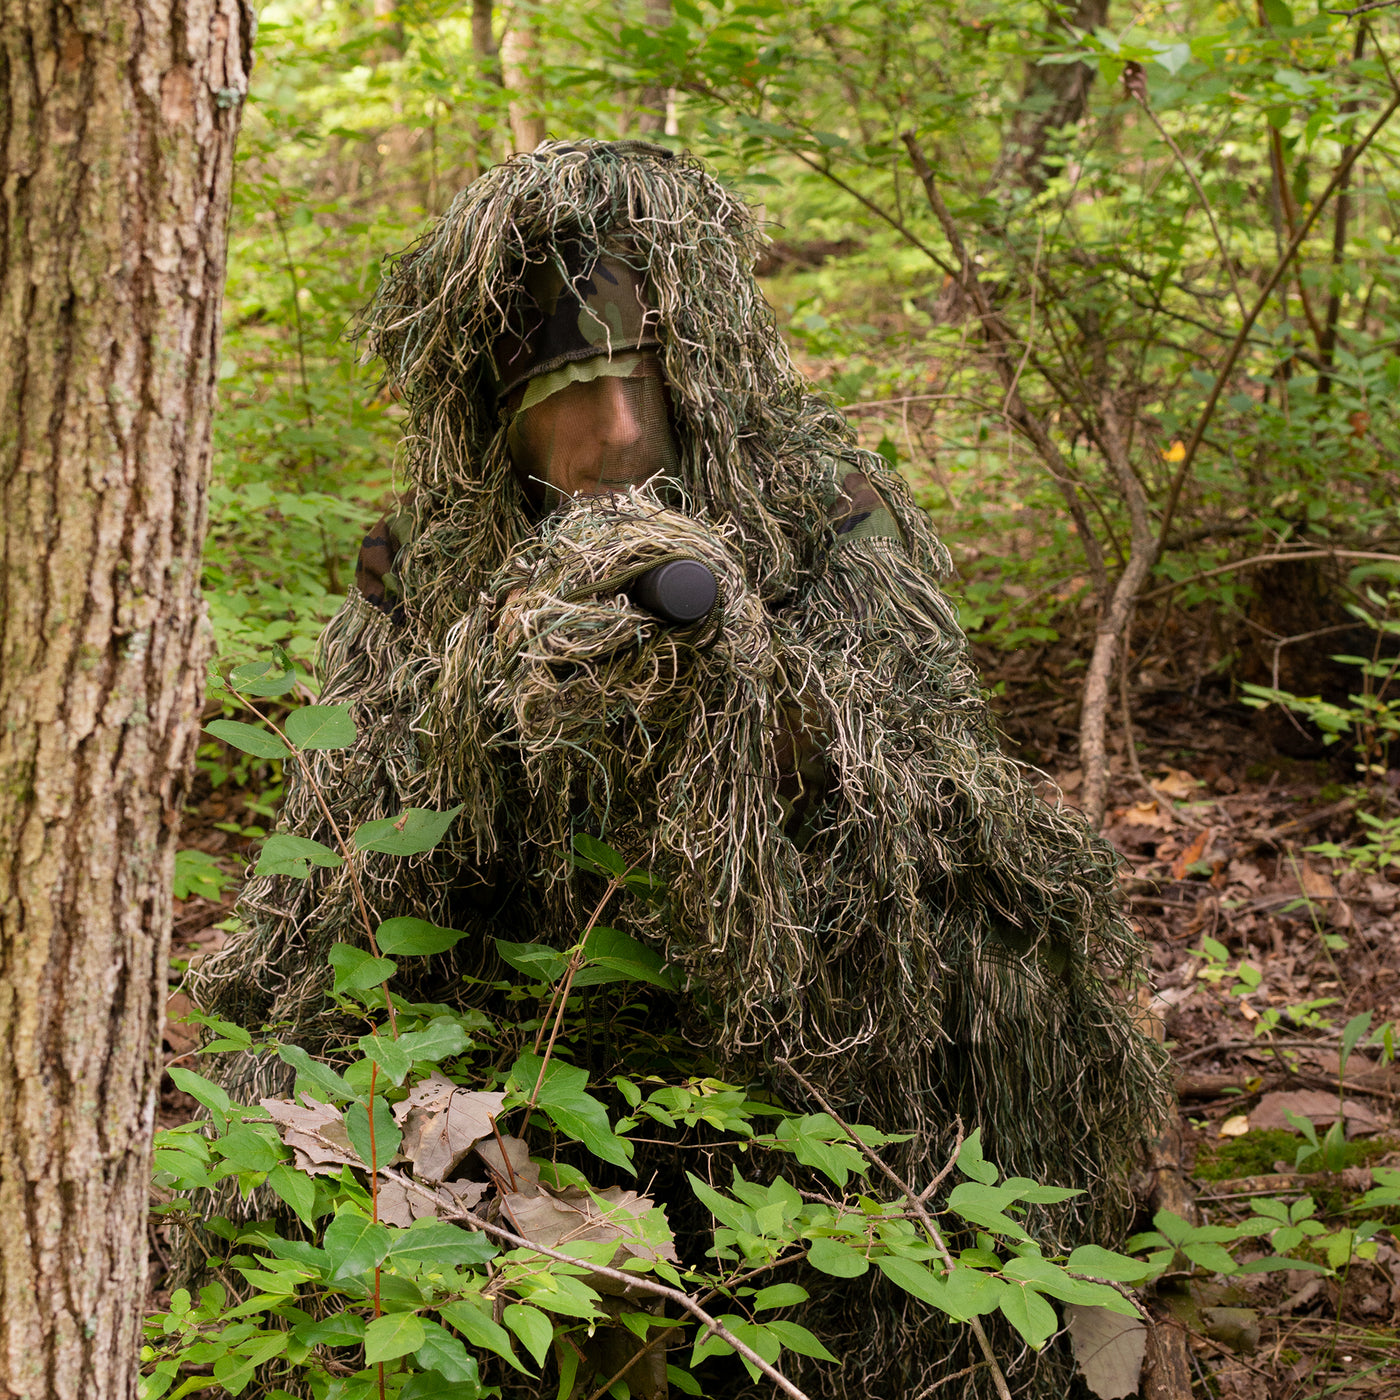 Man in a ghillie suit blending into the outdoor environment.